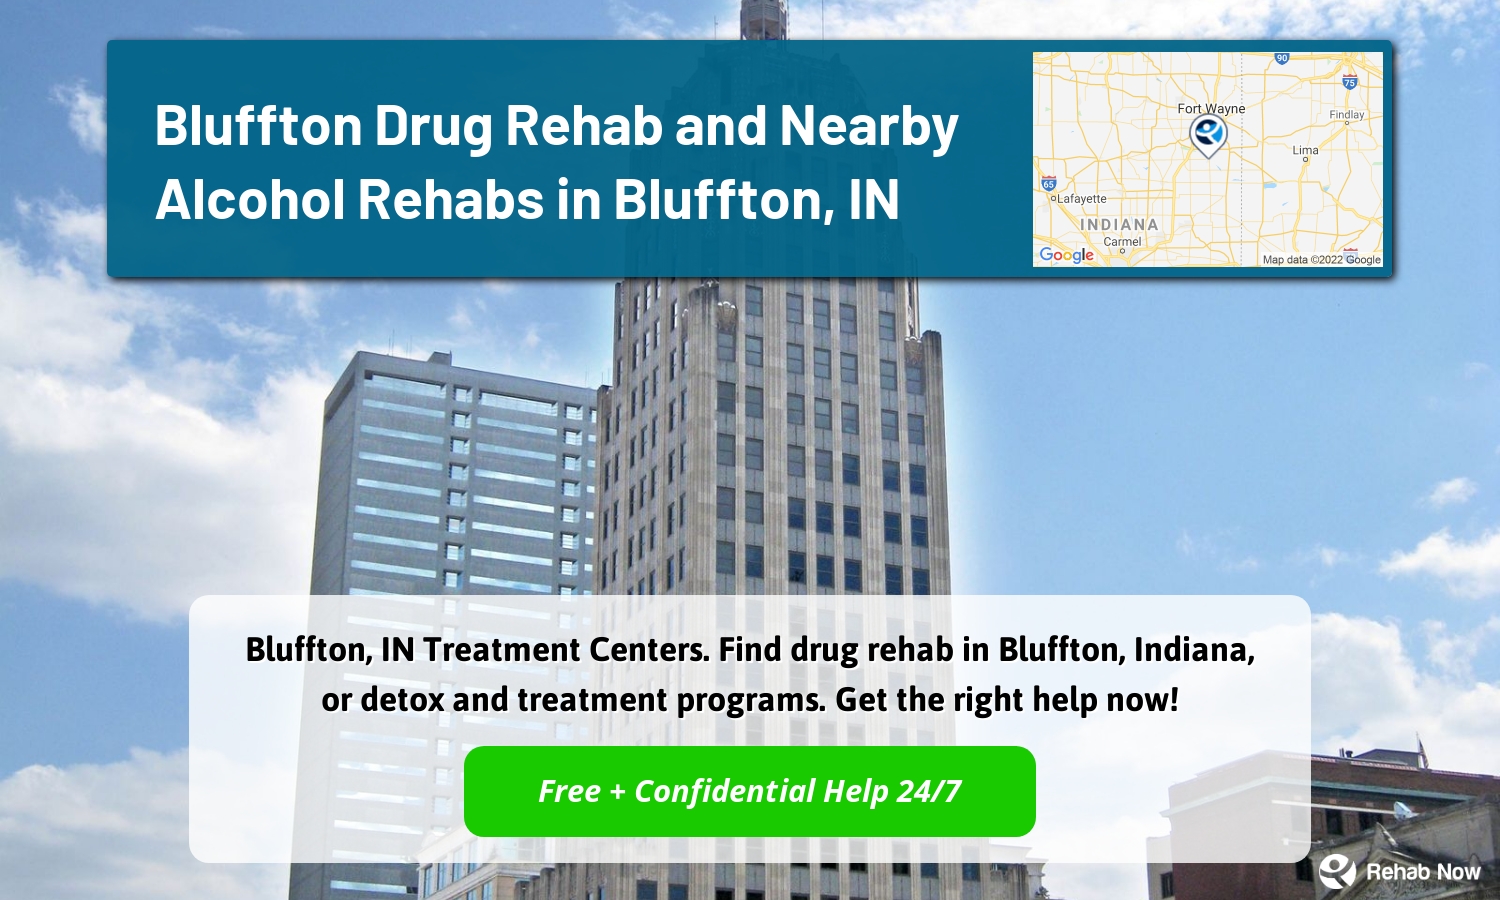 Bluffton, IN Treatment Centers. Find drug rehab in Bluffton, Indiana, or detox and treatment programs. Get the right help now!